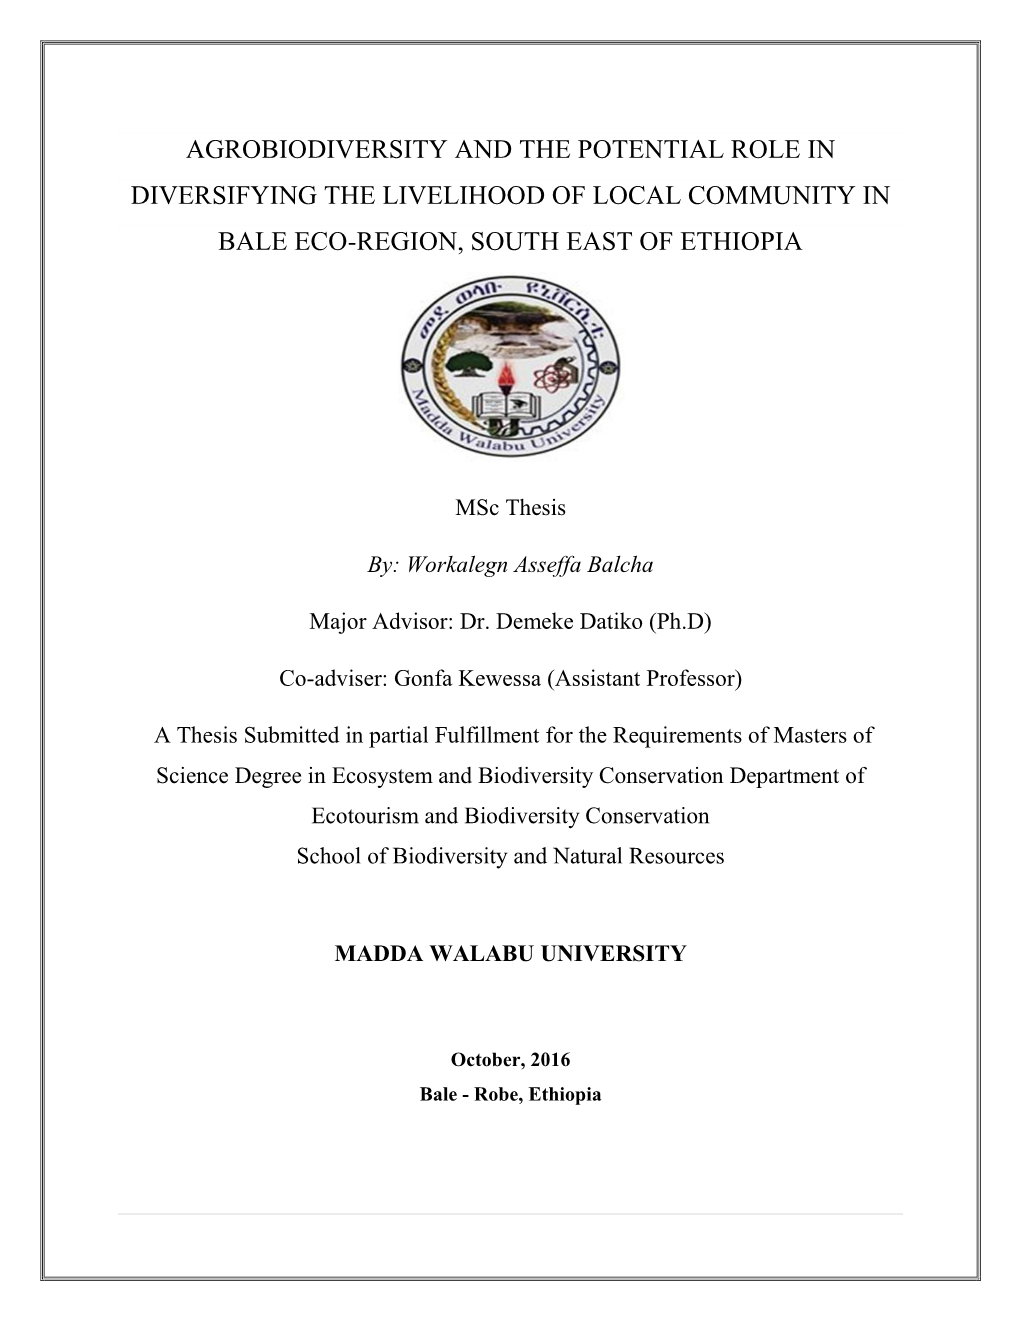 Agrobiodiversity and the Potential Role in Diversifying the Livelihood of Local Community in Bale Eco-Region, South East of Ethiopia